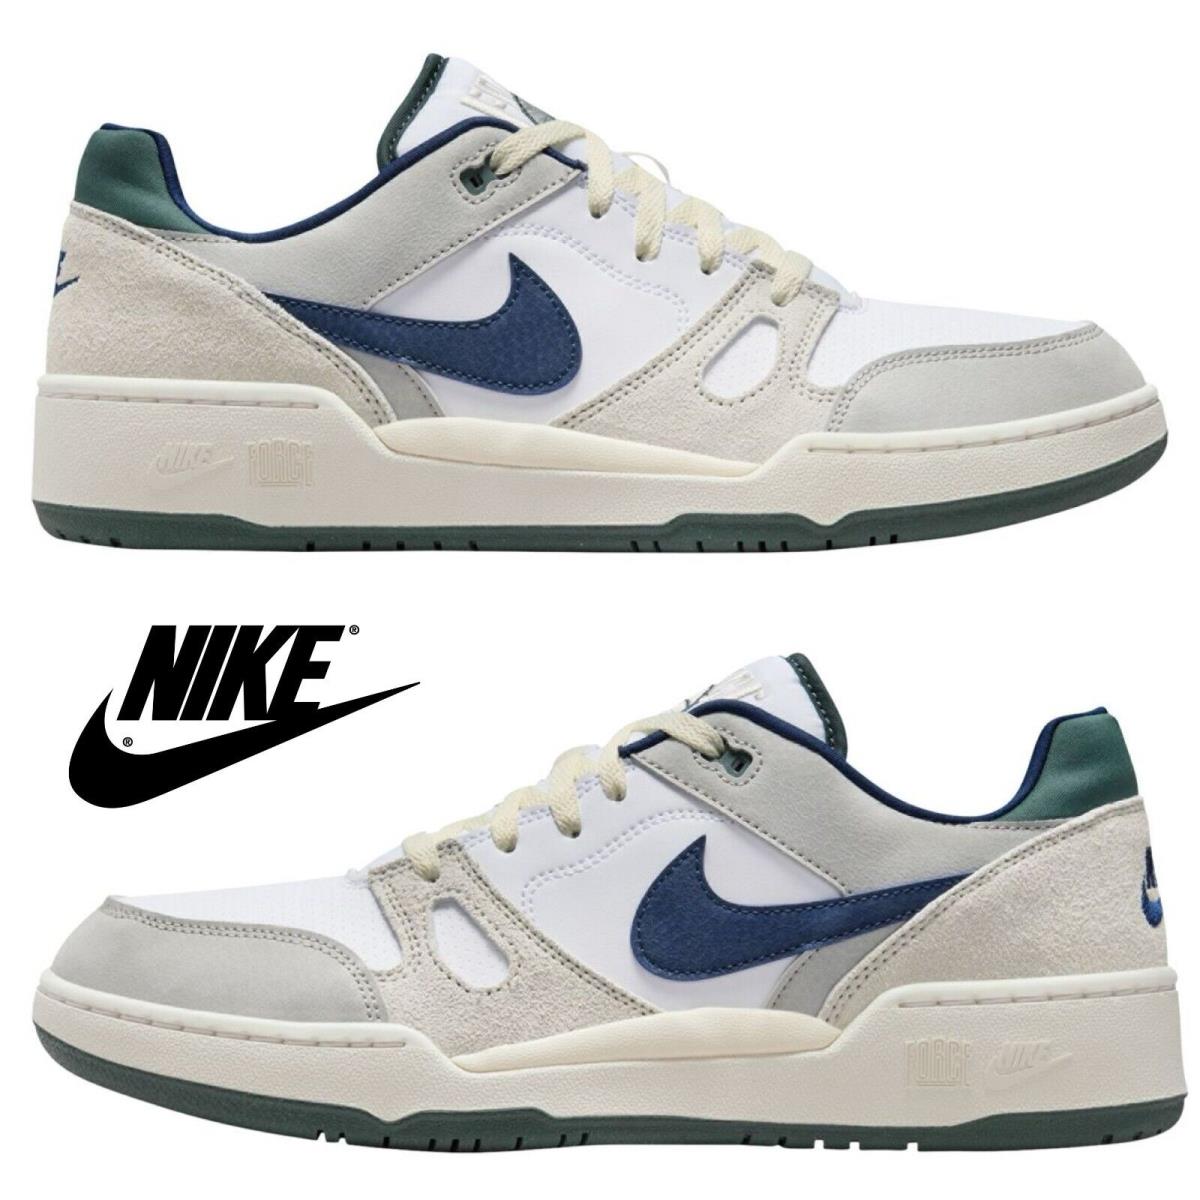 Nike Full Force Low Top Men`s Sneakers Sport Comfort Athletic Shoes White Blue